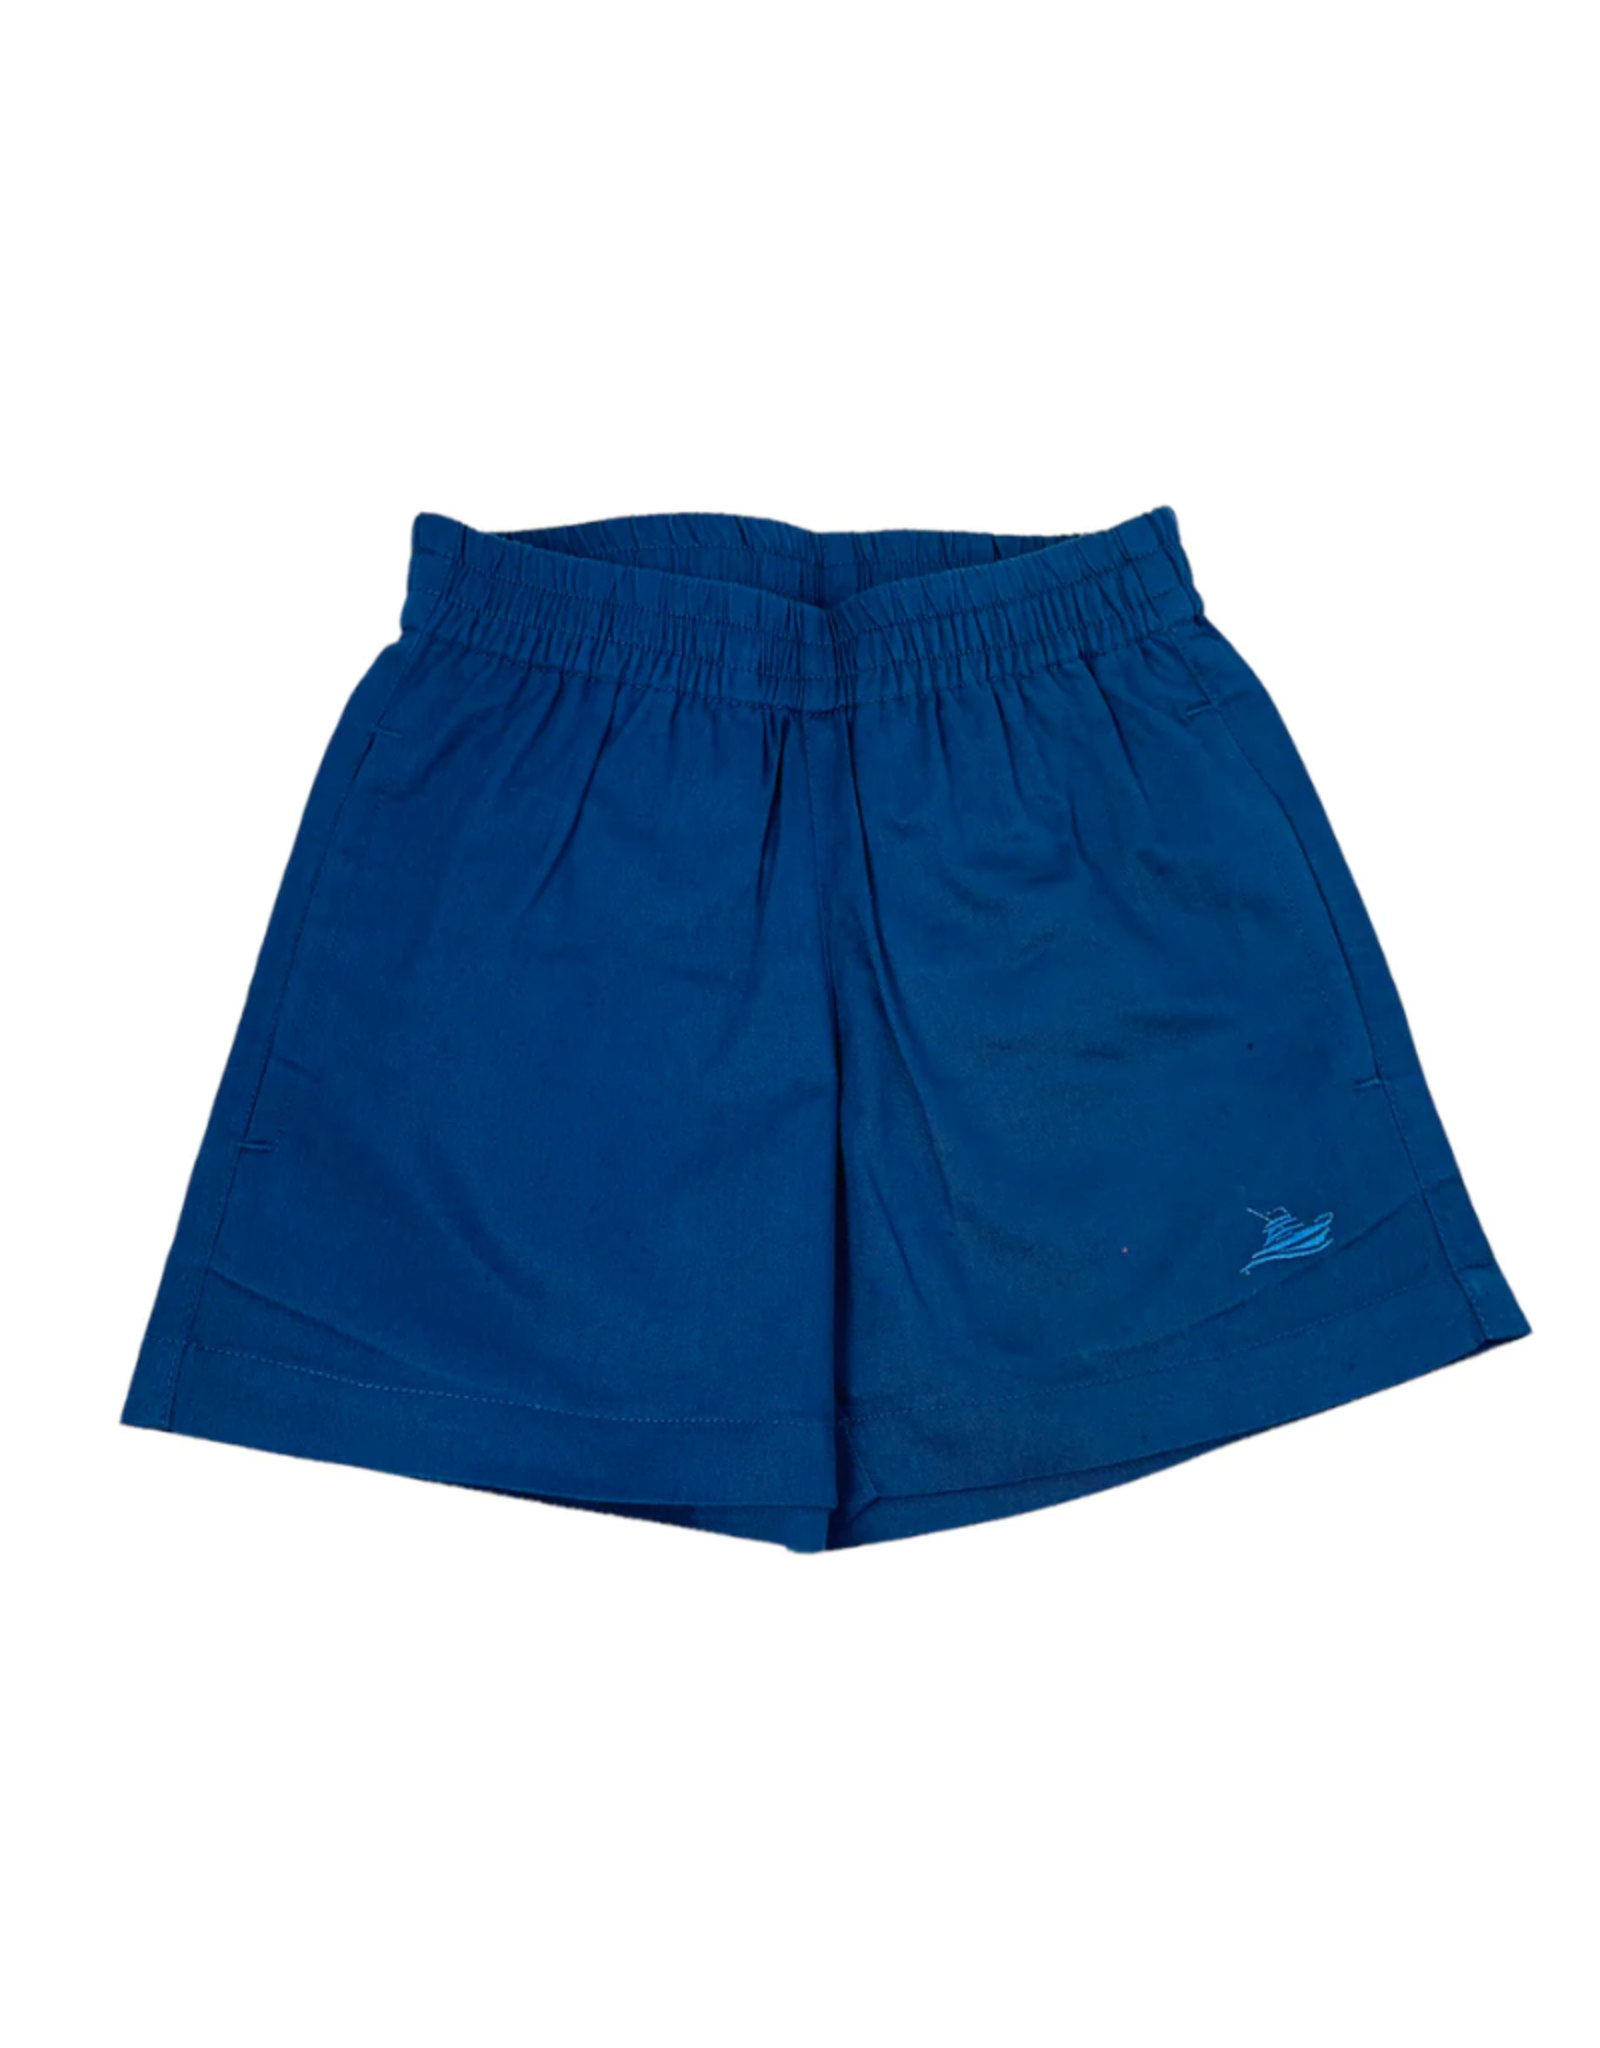 SouthBound Performance Play Shorts, Navy